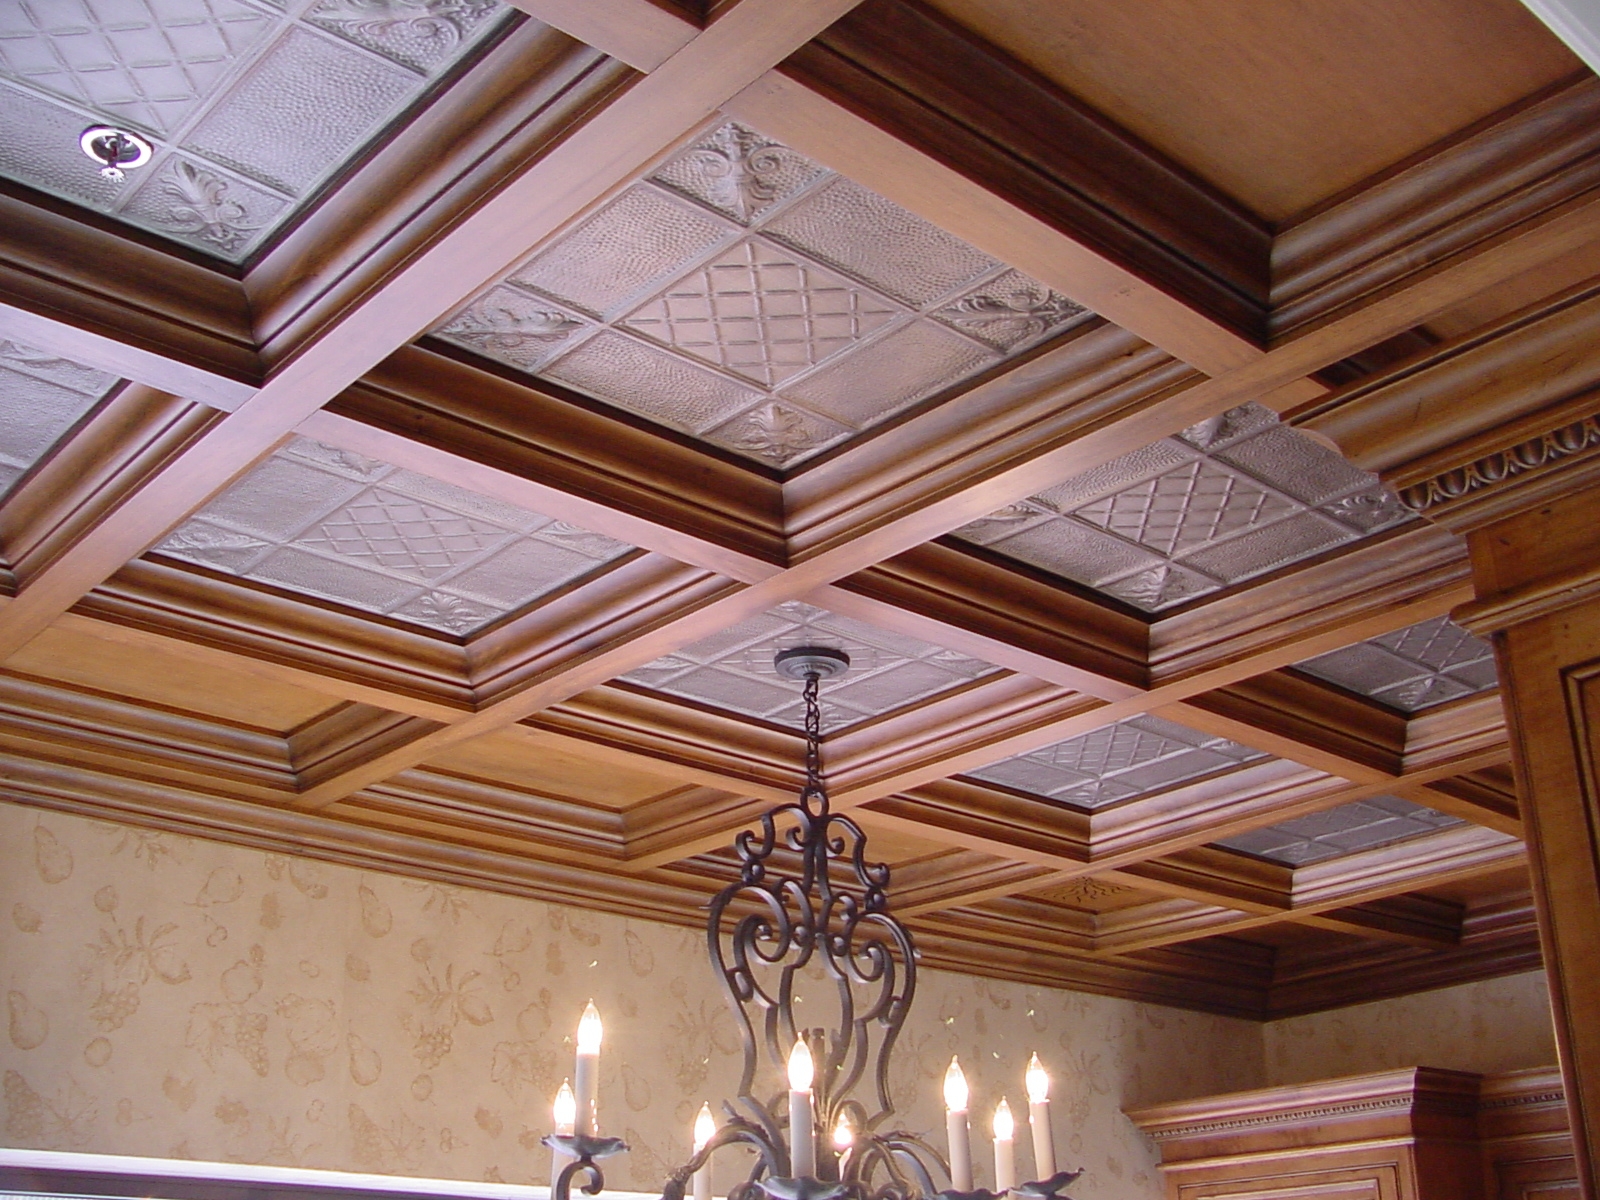 Wood Ceiling Tiles 2x4 Wood Ceiling Tiles 2×4 woodgrid coffered drop ceiling panels modern ceiling design 1600 X 1200